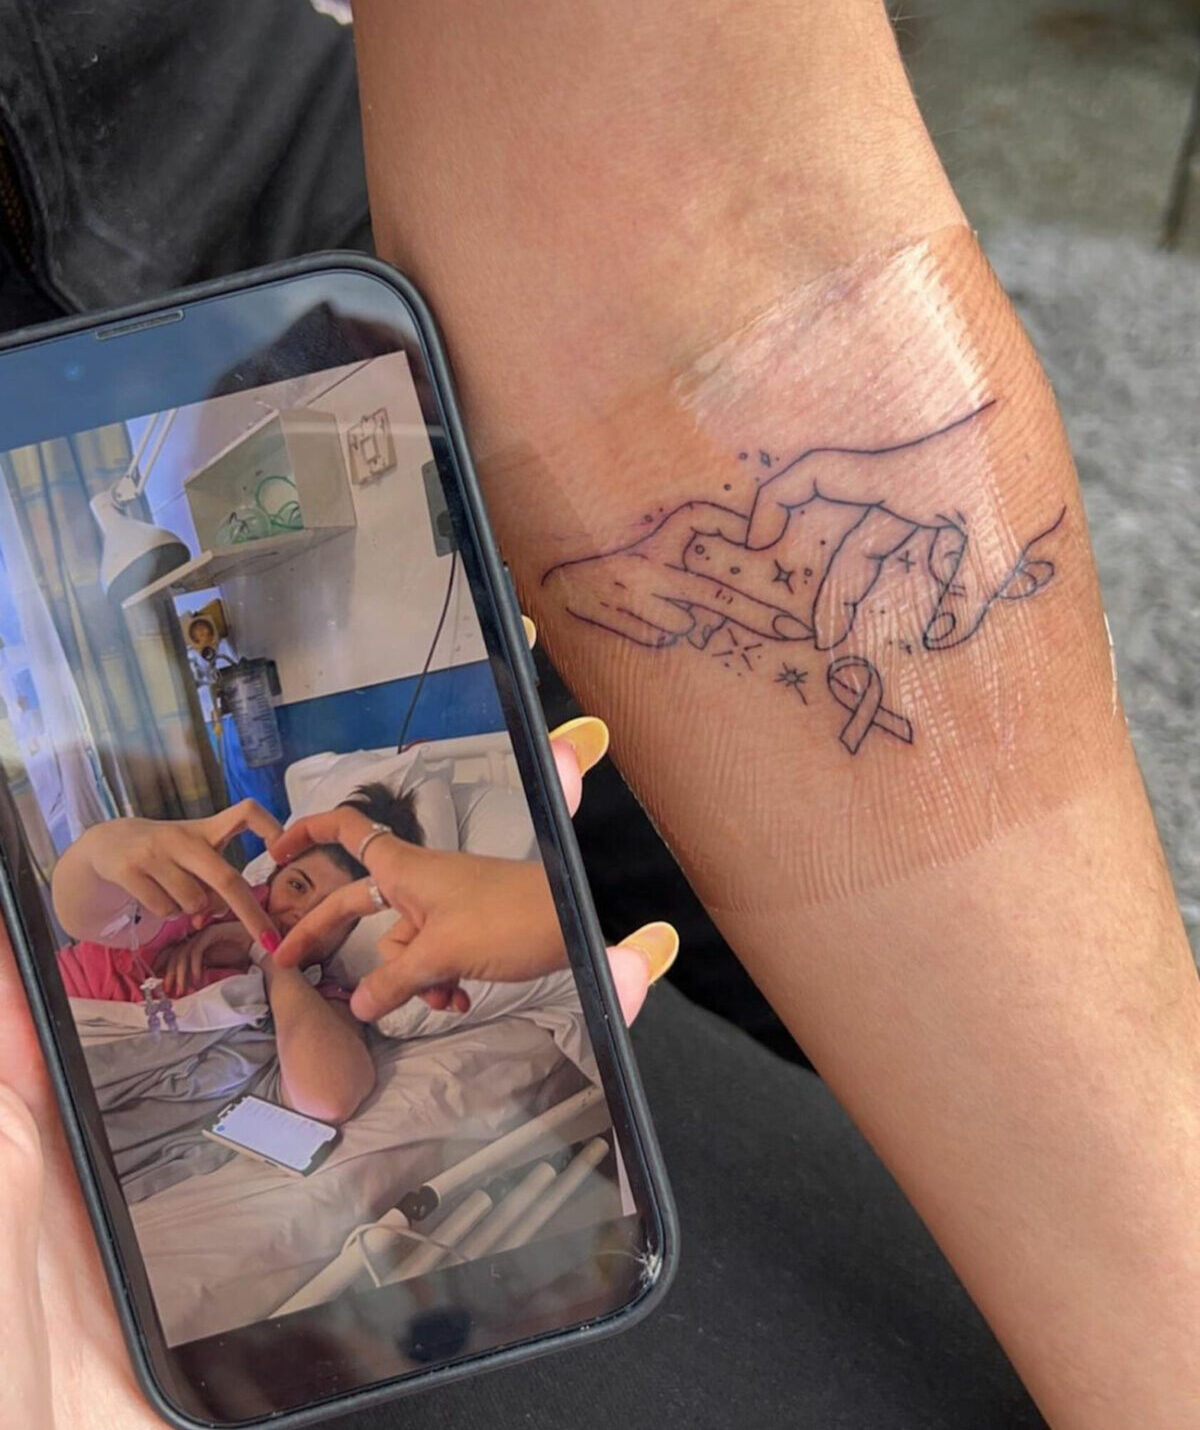 Cancer patient in tears after best friend reveals special tattoo